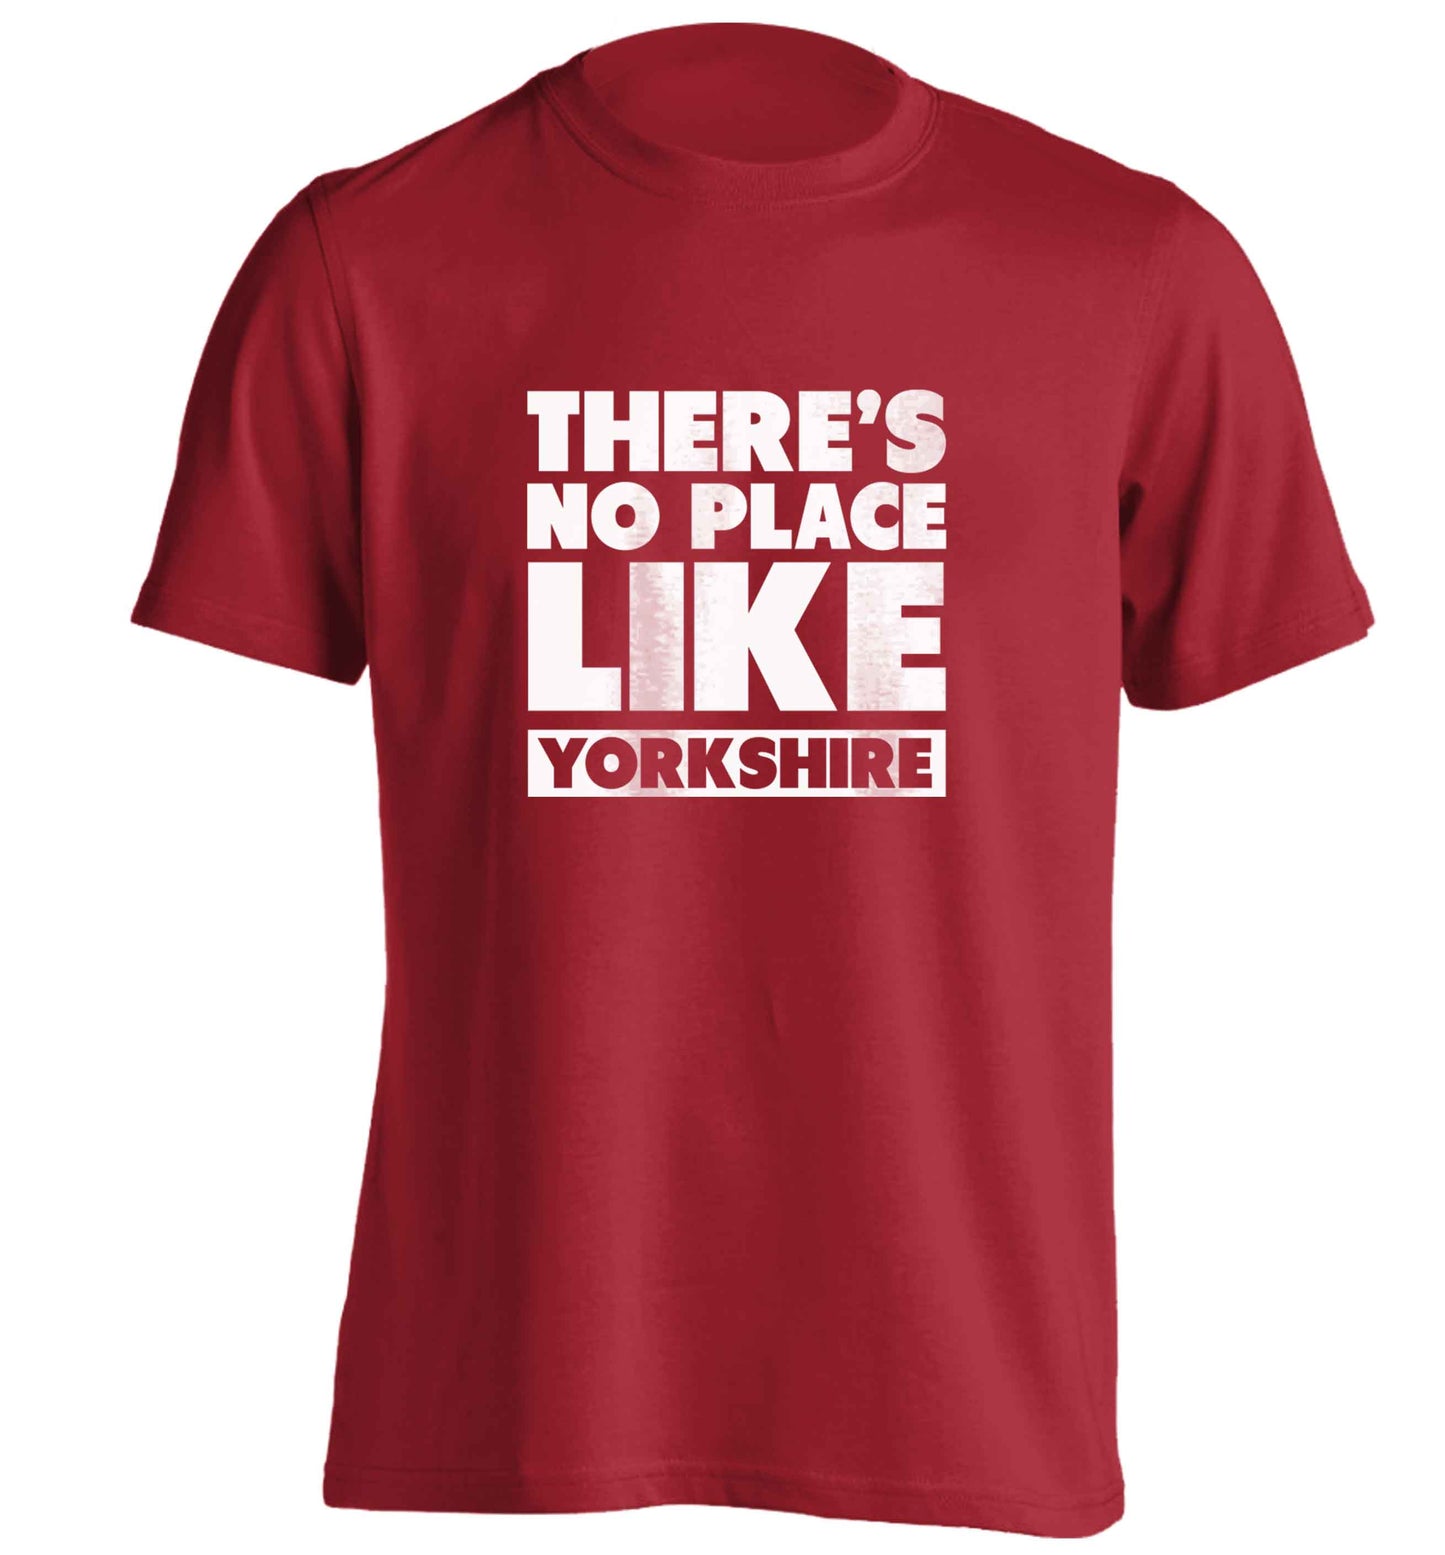 There's no place like Yorkshire adults unisex red Tshirt 2XL